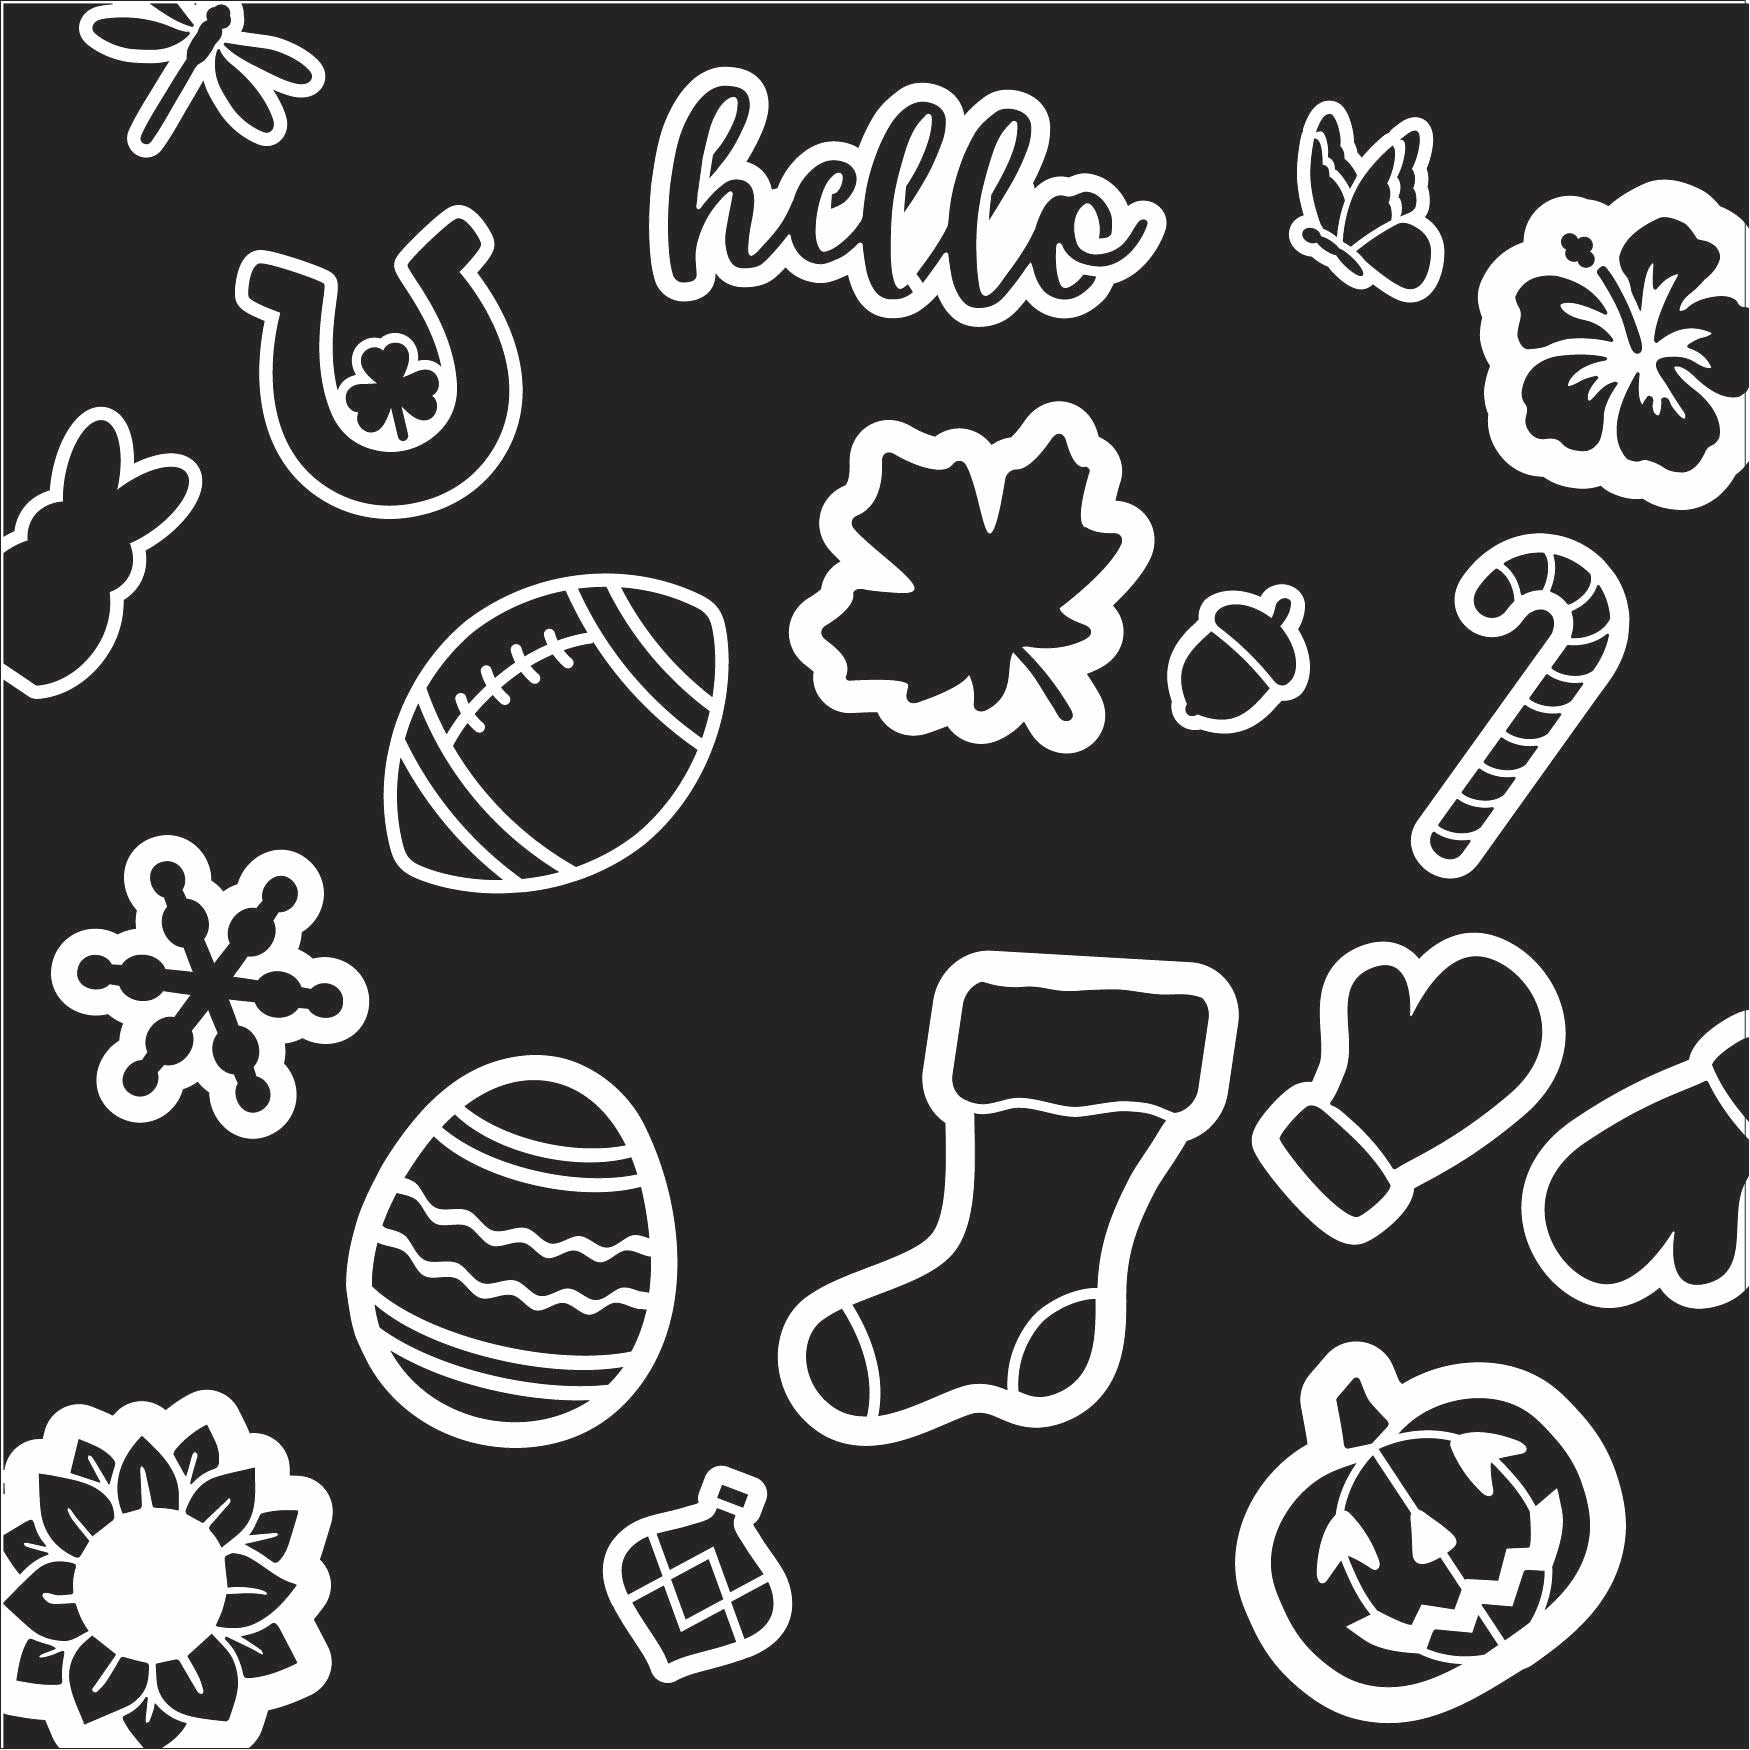 a display of Plata Chalkboards magnetic chalkboard stencils for easy DIY chalkboard signs, shows Christmas stencils, Halloween stencils, Easter stencils, sports stencils, and seasonal stencils